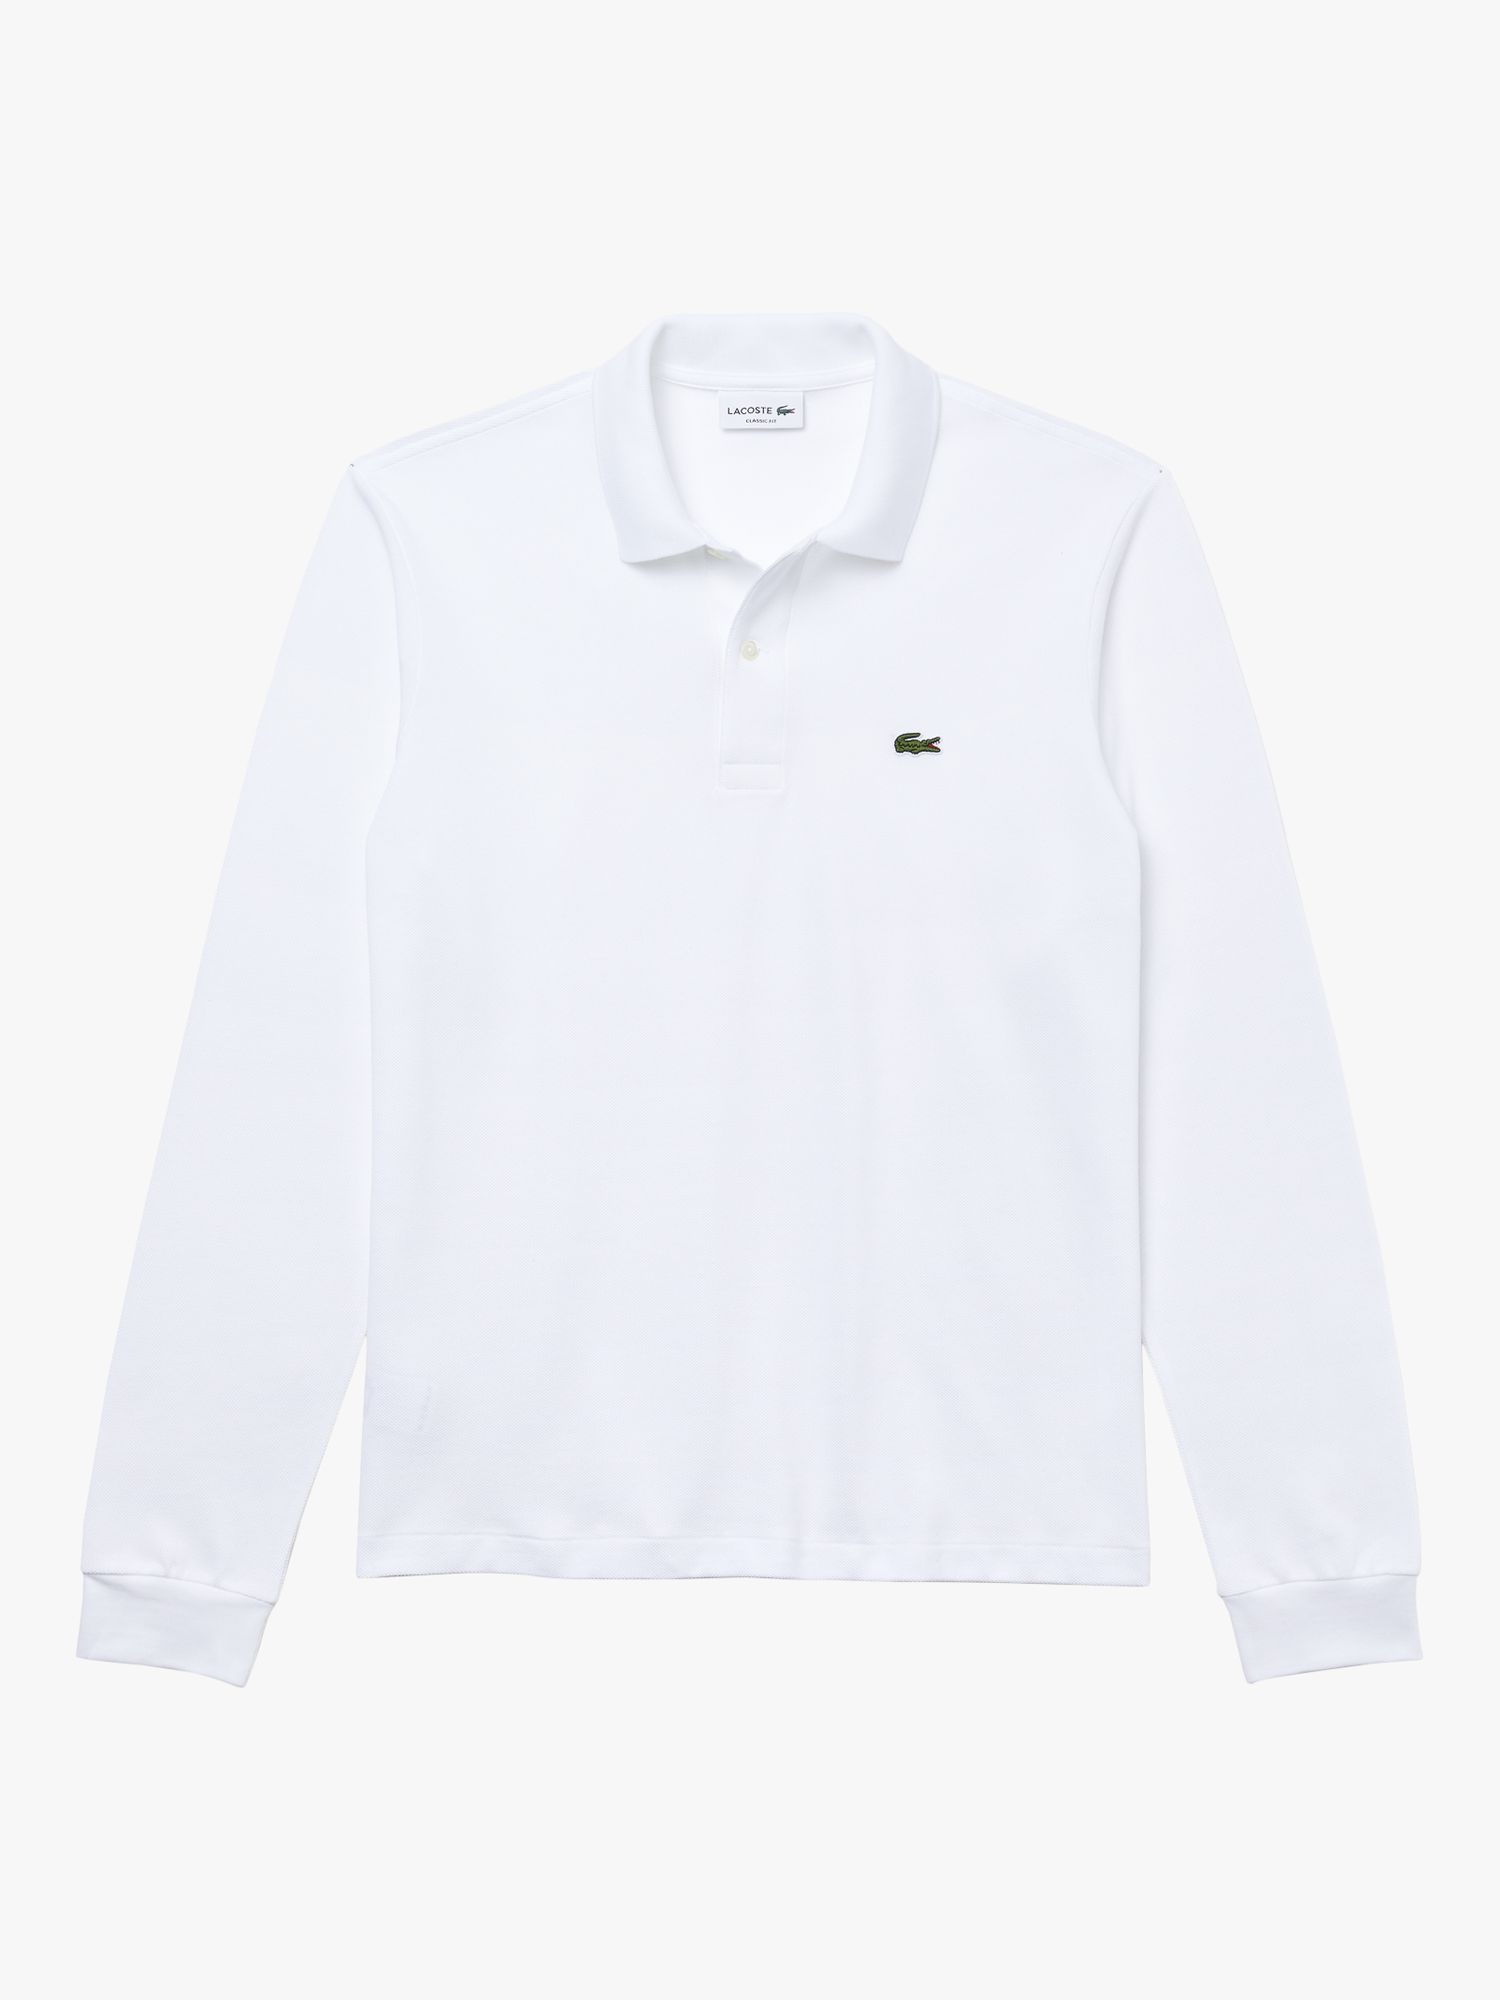 Lacoste L.13.12 Classic Regular Fit Long Sleeve Polo Shirt, 001 White, S